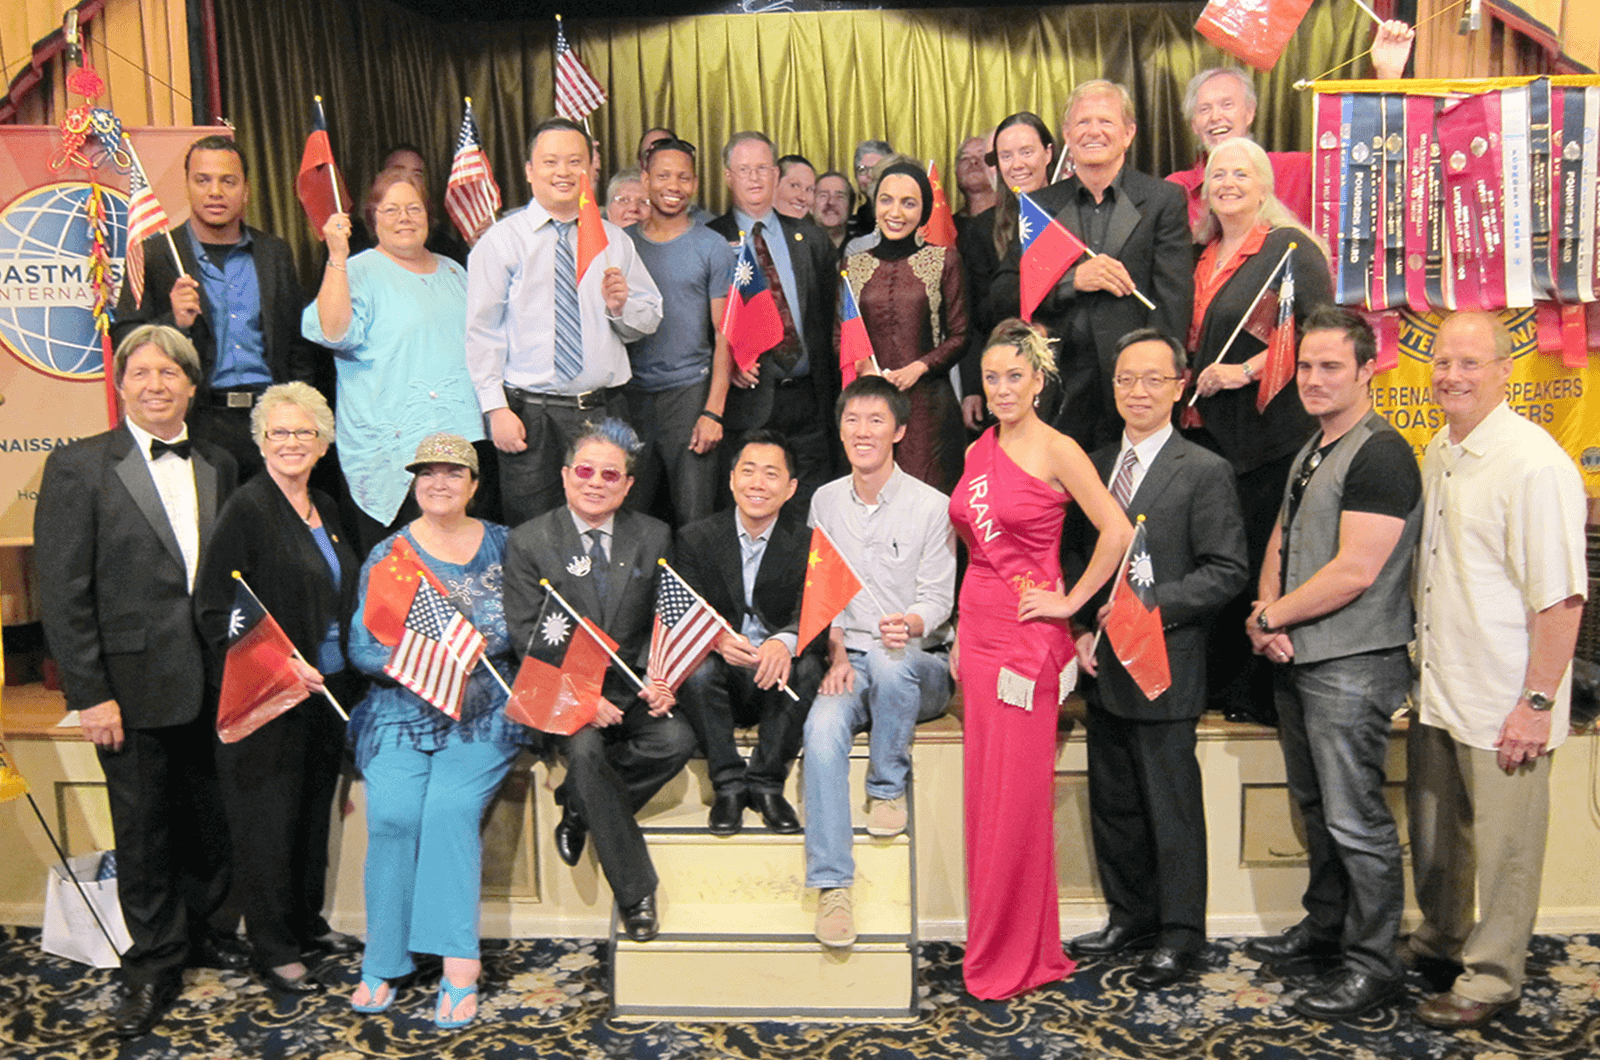 A group of members from the Renaissance Speakers Toastmasters club pose with banners and flags